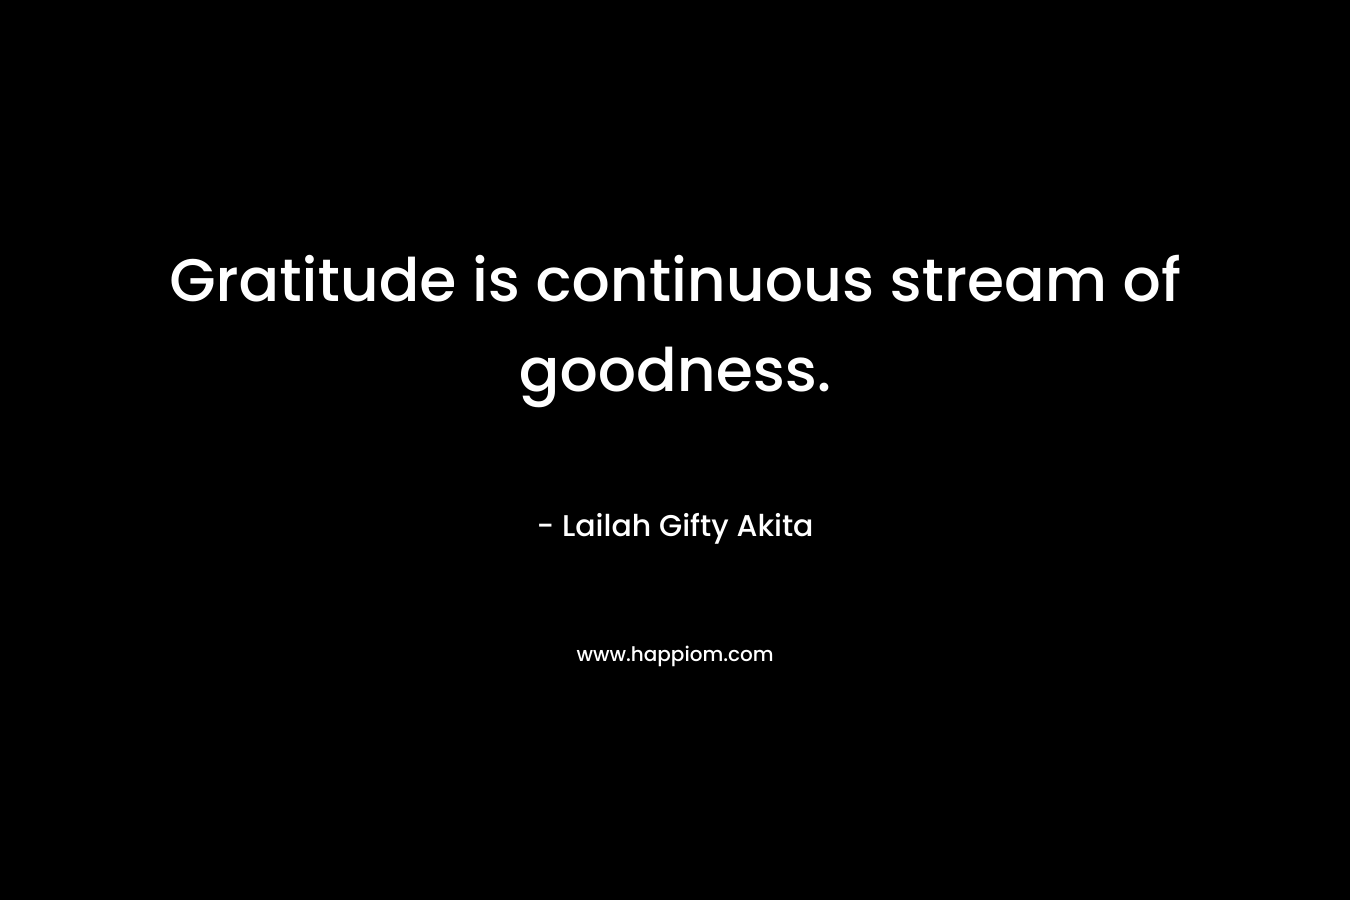 Gratitude is continuous stream of goodness.